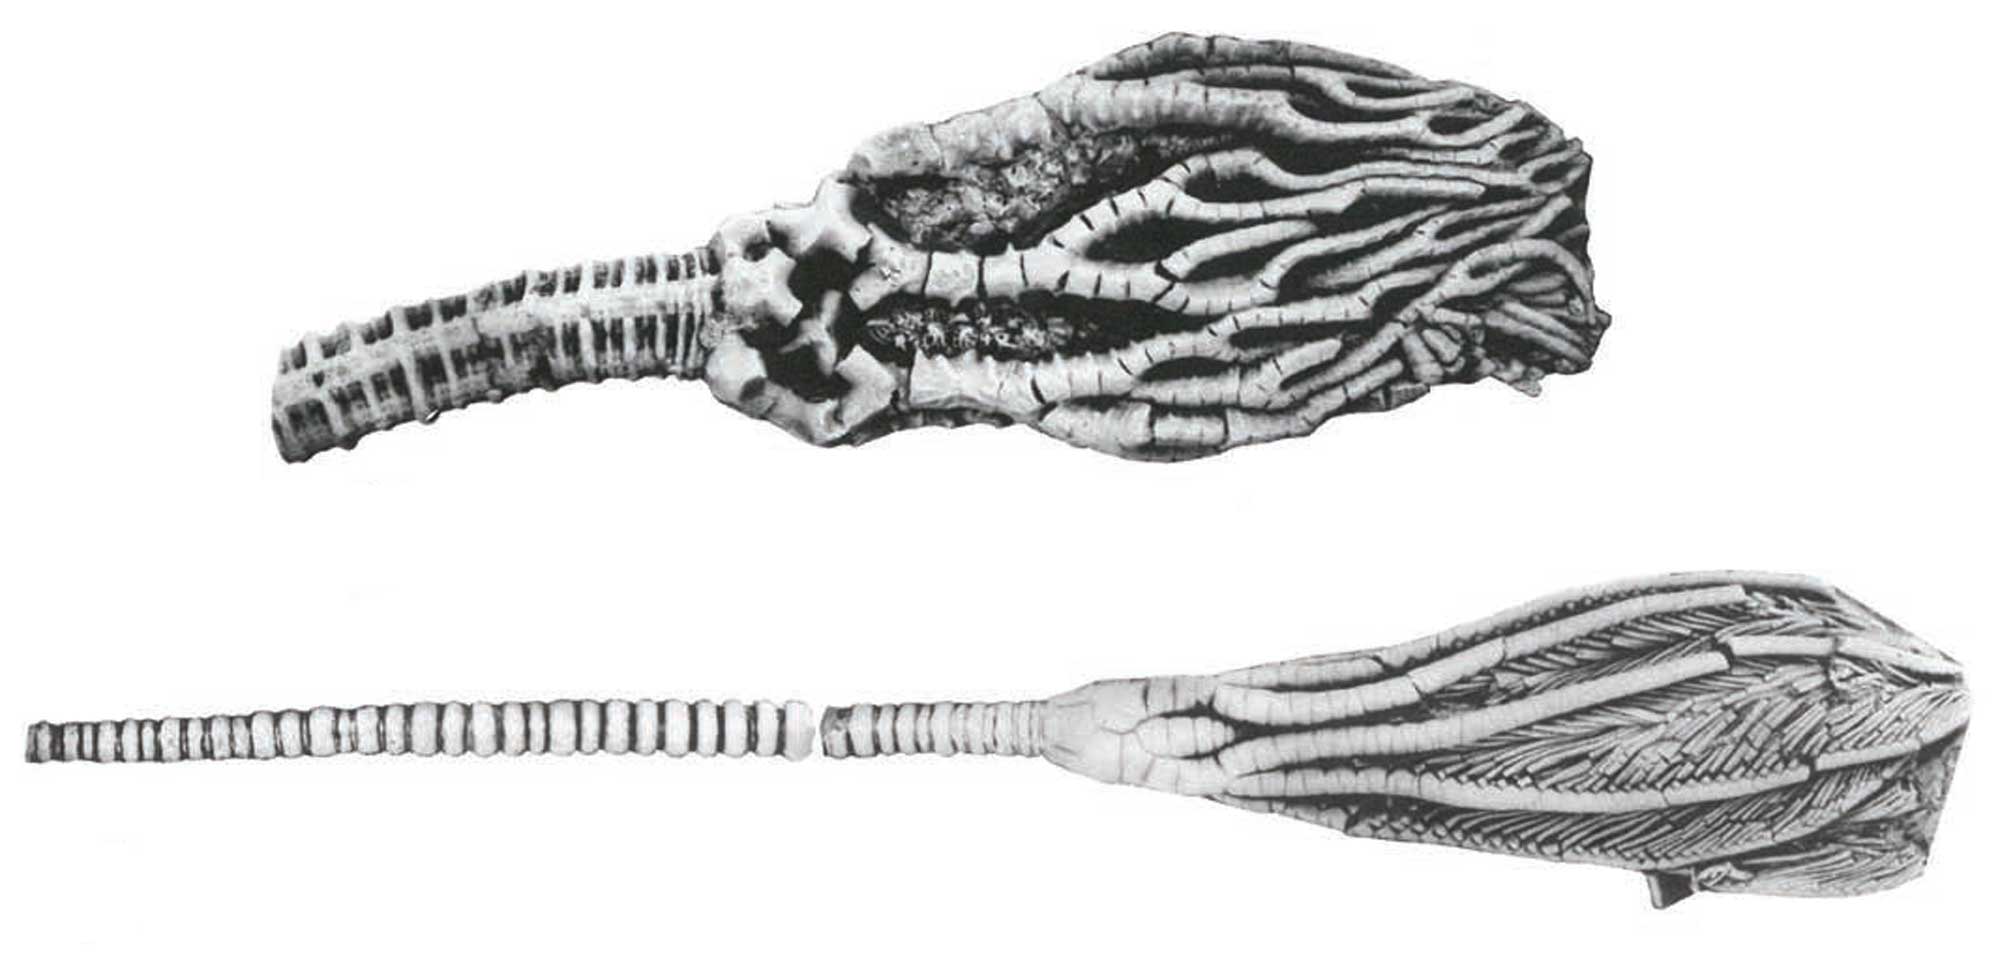 Image showing photographs of two Ordovician crinoids from Tennessee. The calyx, arms, and a portion of the stem of each specimen is illustrated.